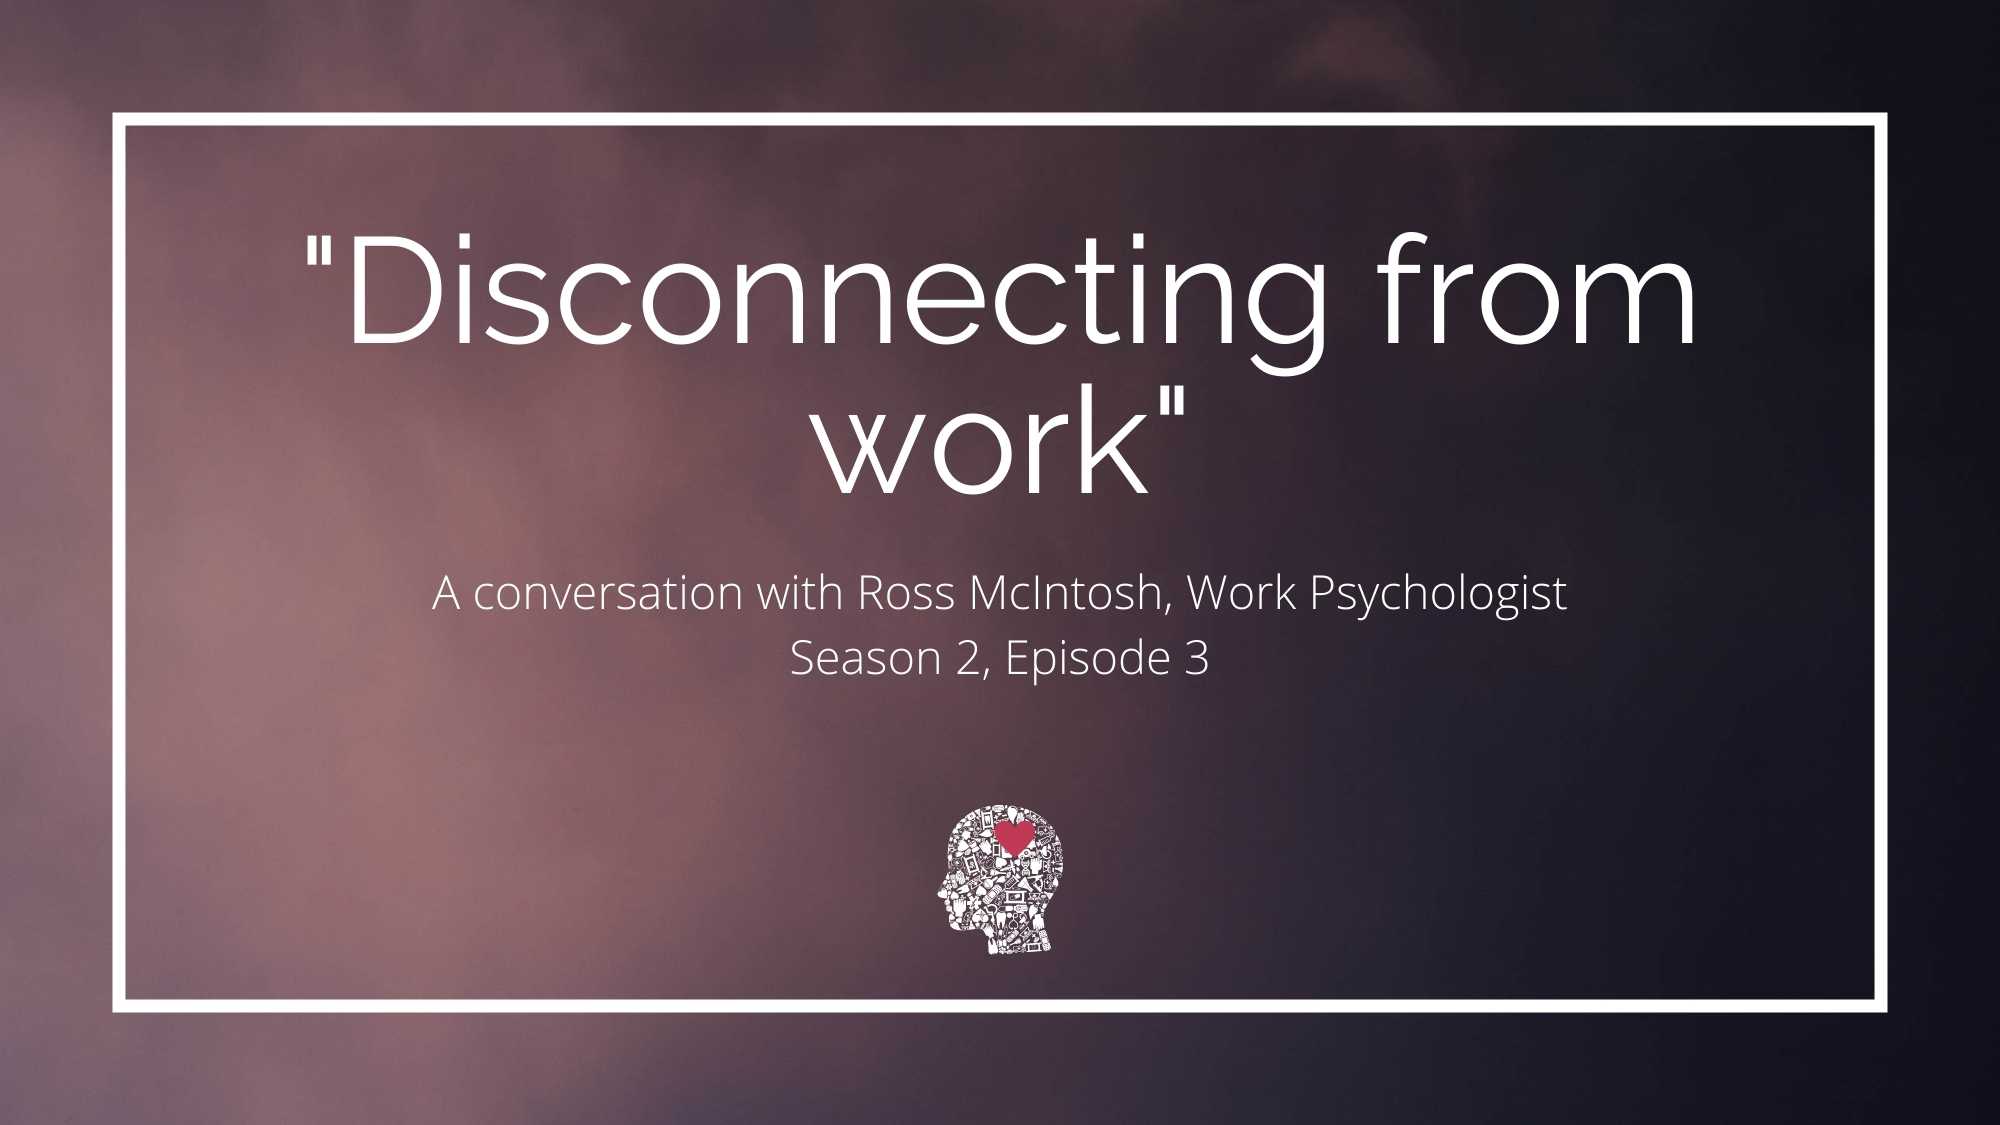 Disconnecting from work - Ross McIntosh